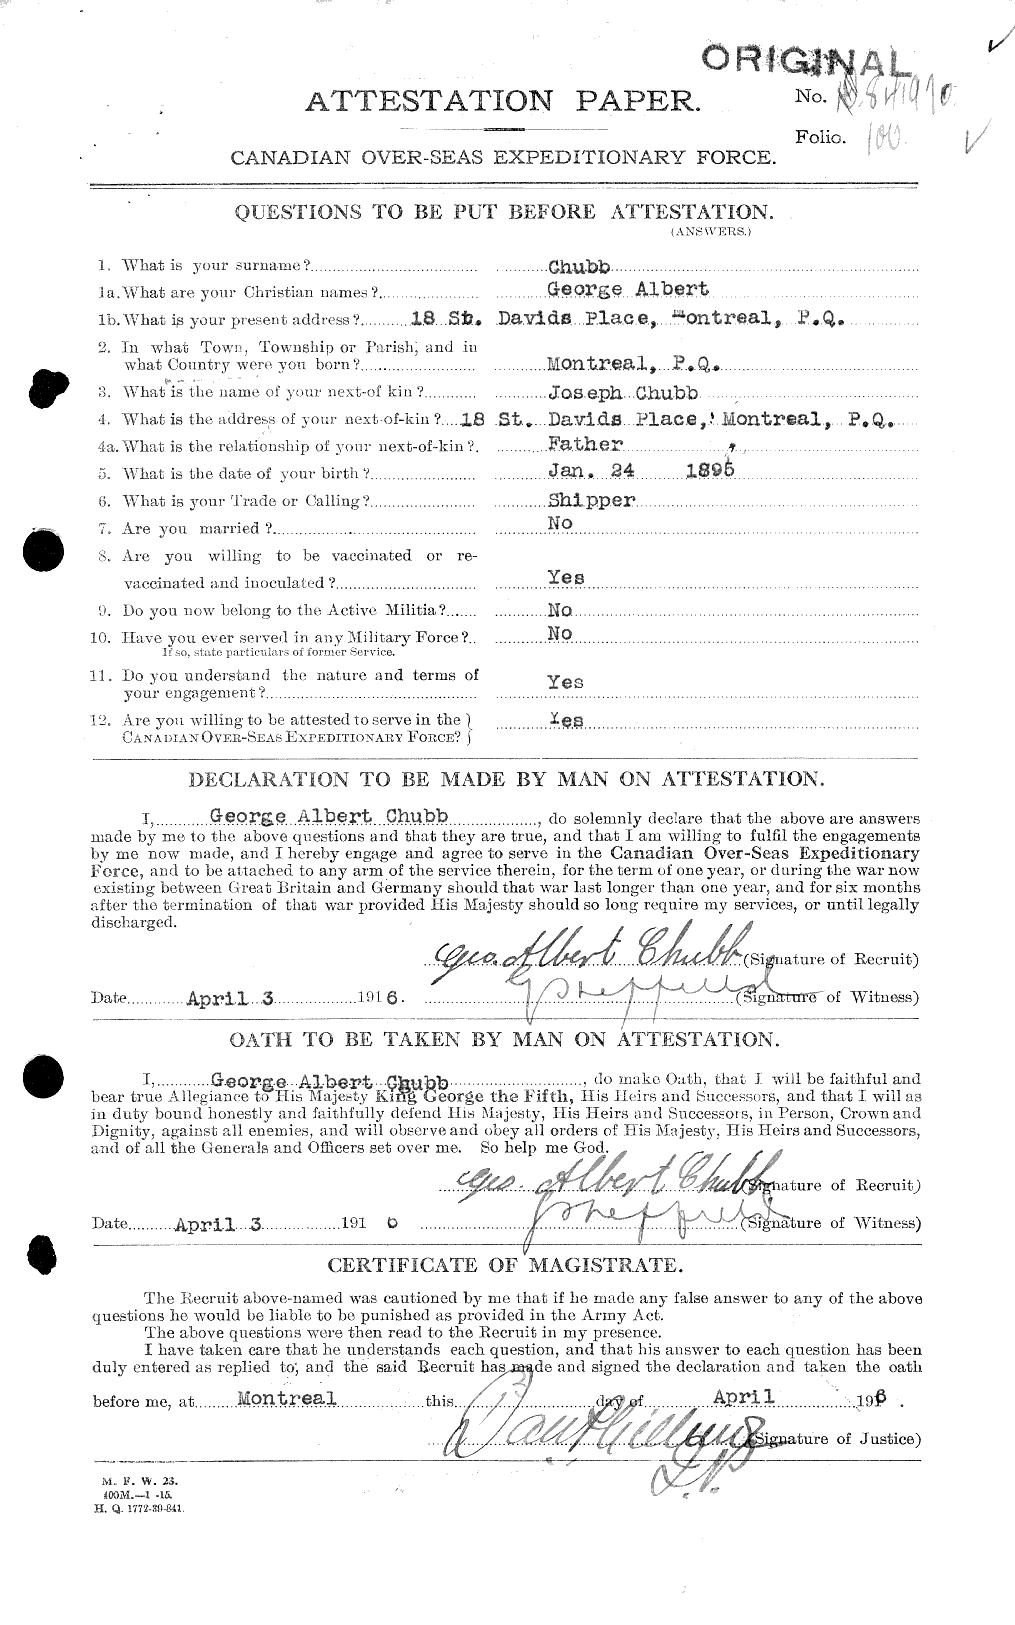 Personnel Records of the First World War - CEF 022265b